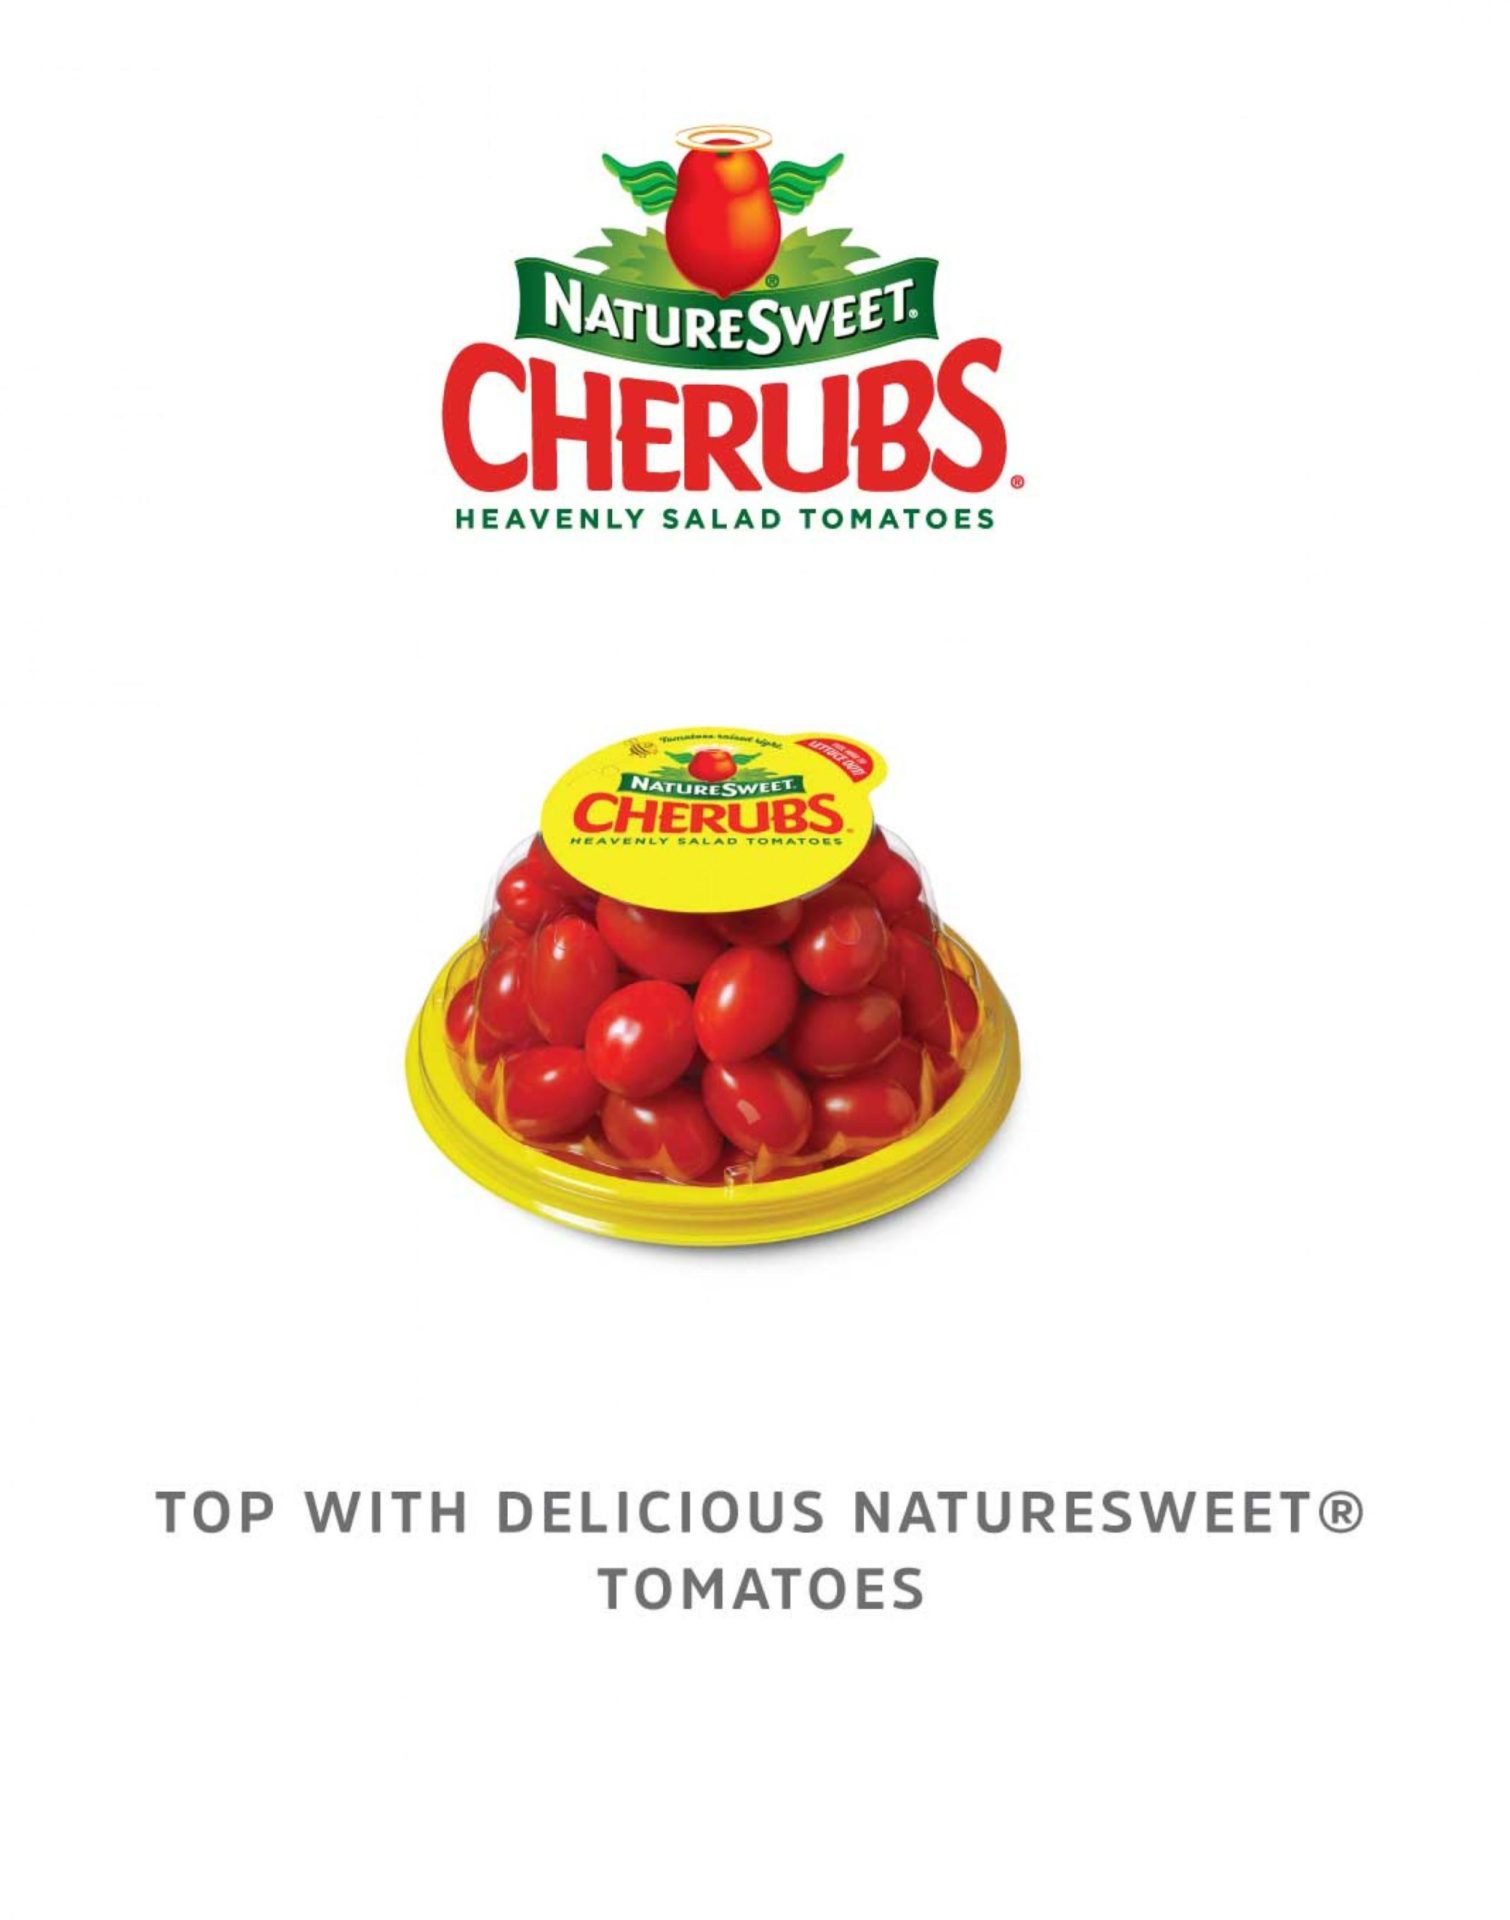 TOP WITH DELICIOUS NATURESWEET TOMATOES